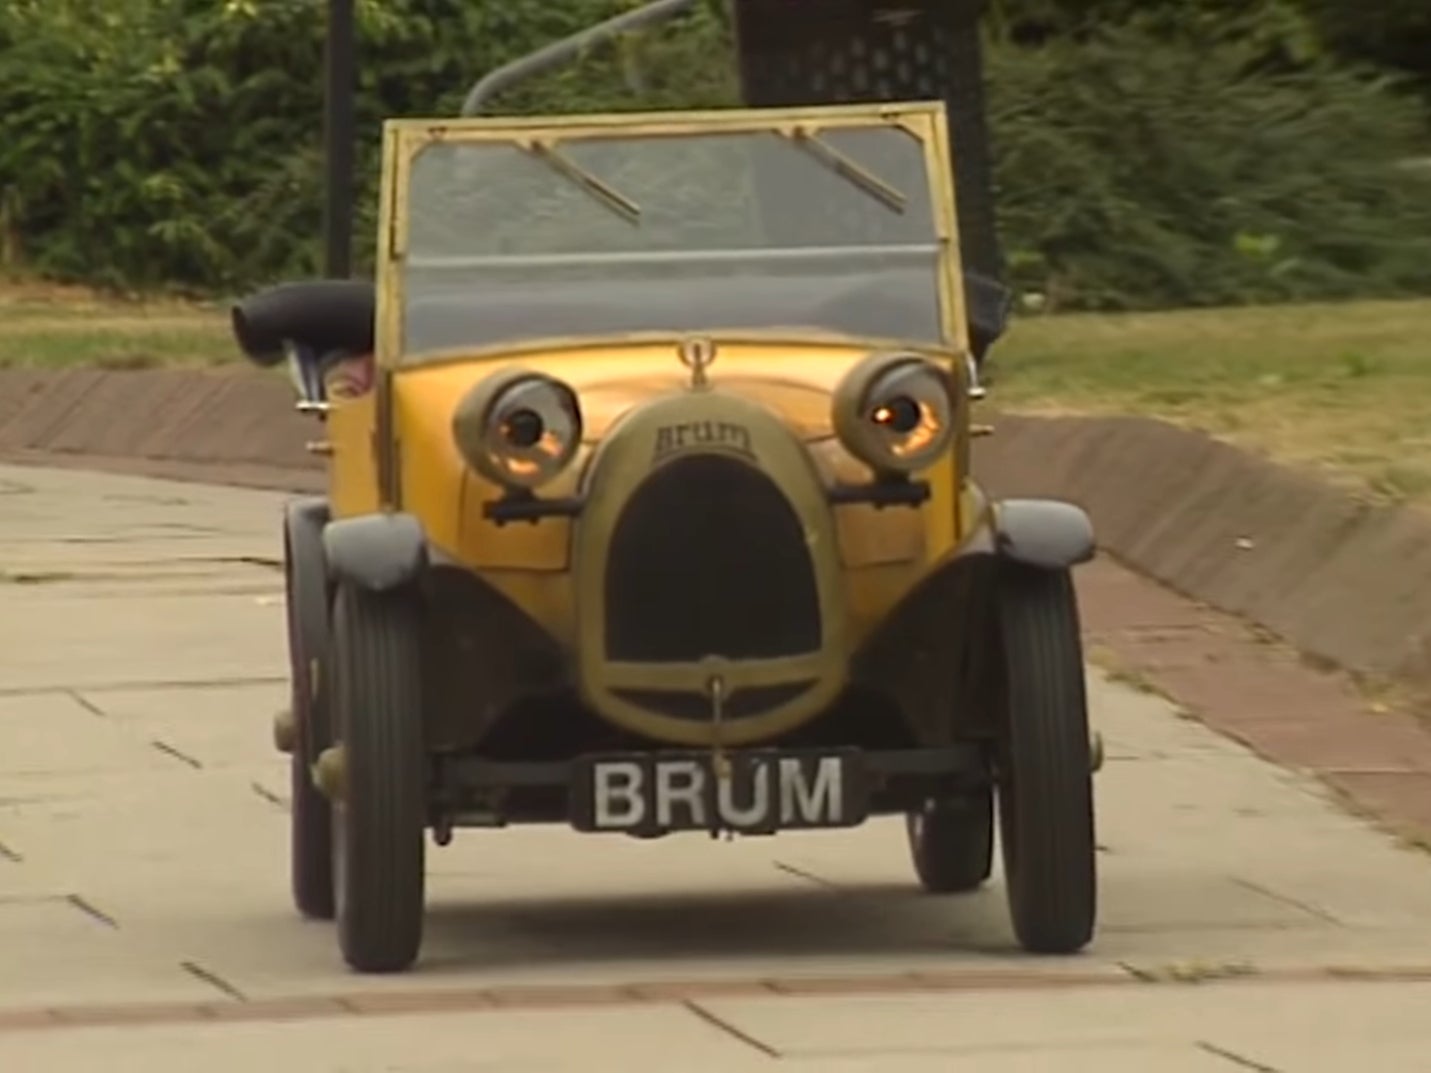 Children's series 'Brum' first aired from 1991 to 1994 on the BBC